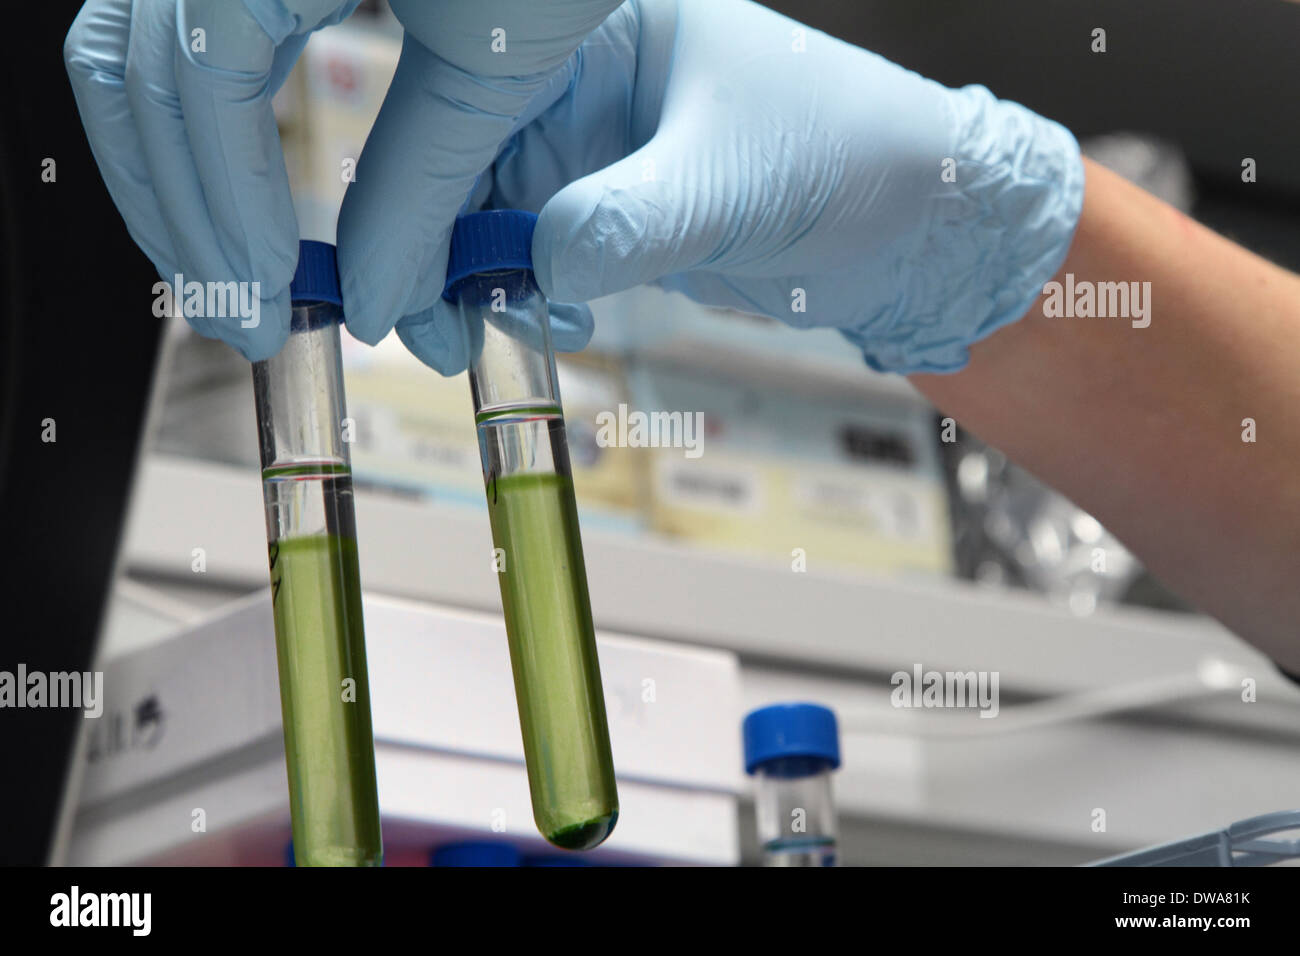 a glove hand holding glass tubes with a probe in a biology lab Stock Photo